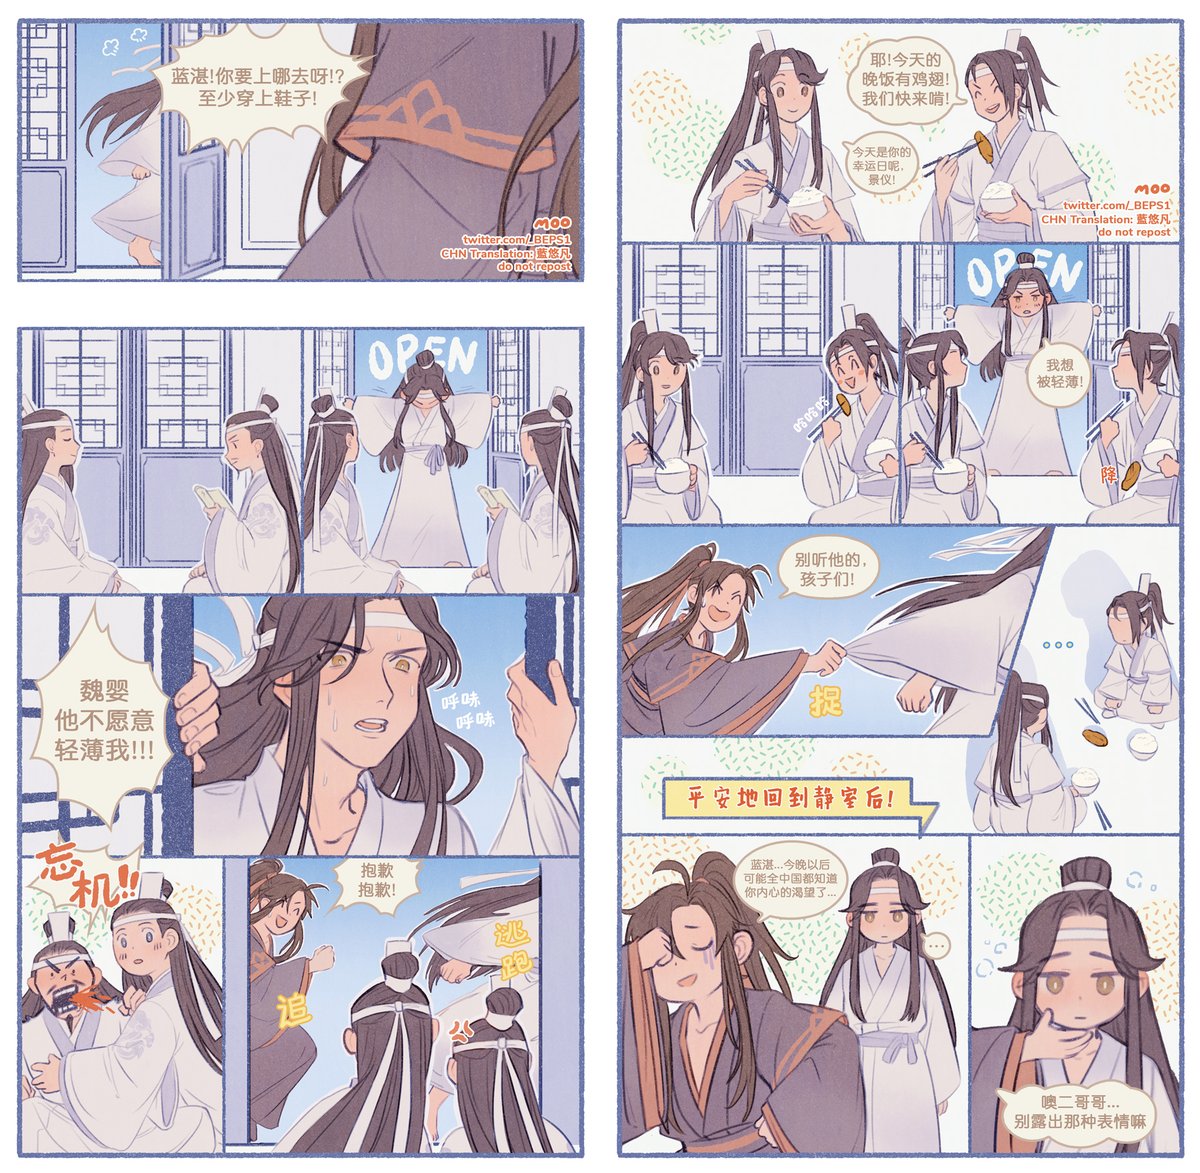 Lan Zhan's "I want to be ravished" Comic
with Chinese Translation! 

A really kind Weibo user wanted to share their translation with me and I thought it'd be fun to incorporated into the comic itself ^^ Translator: 藍悠凡 (https://t.co/9EzUxpnOh3)
#魔道祖师 